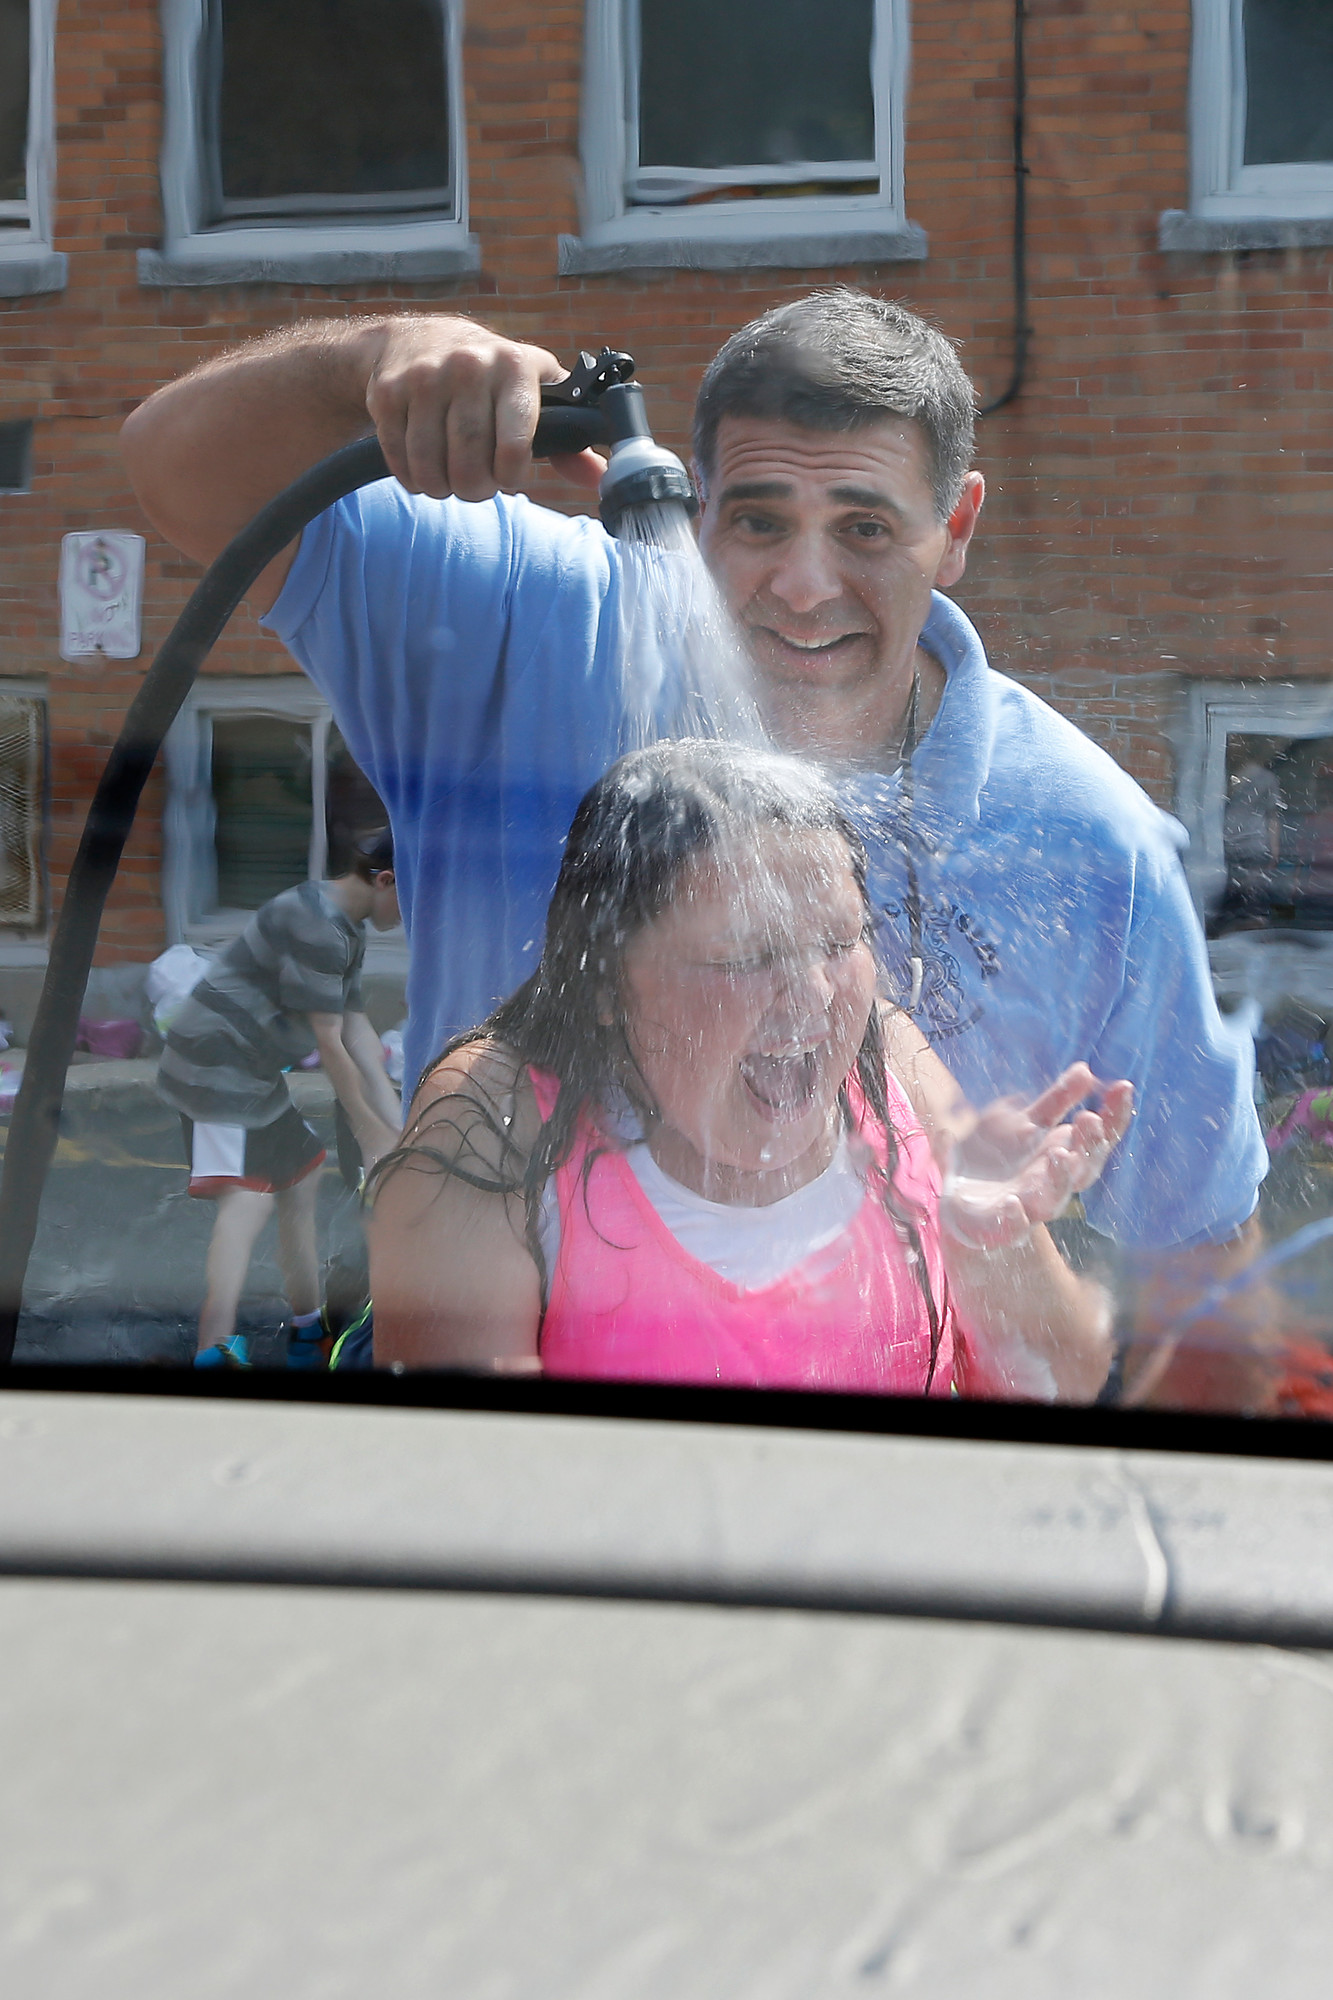 Head Counselor Chris Marzo rinsed off soon-to-be fourth grader Karley Albano.